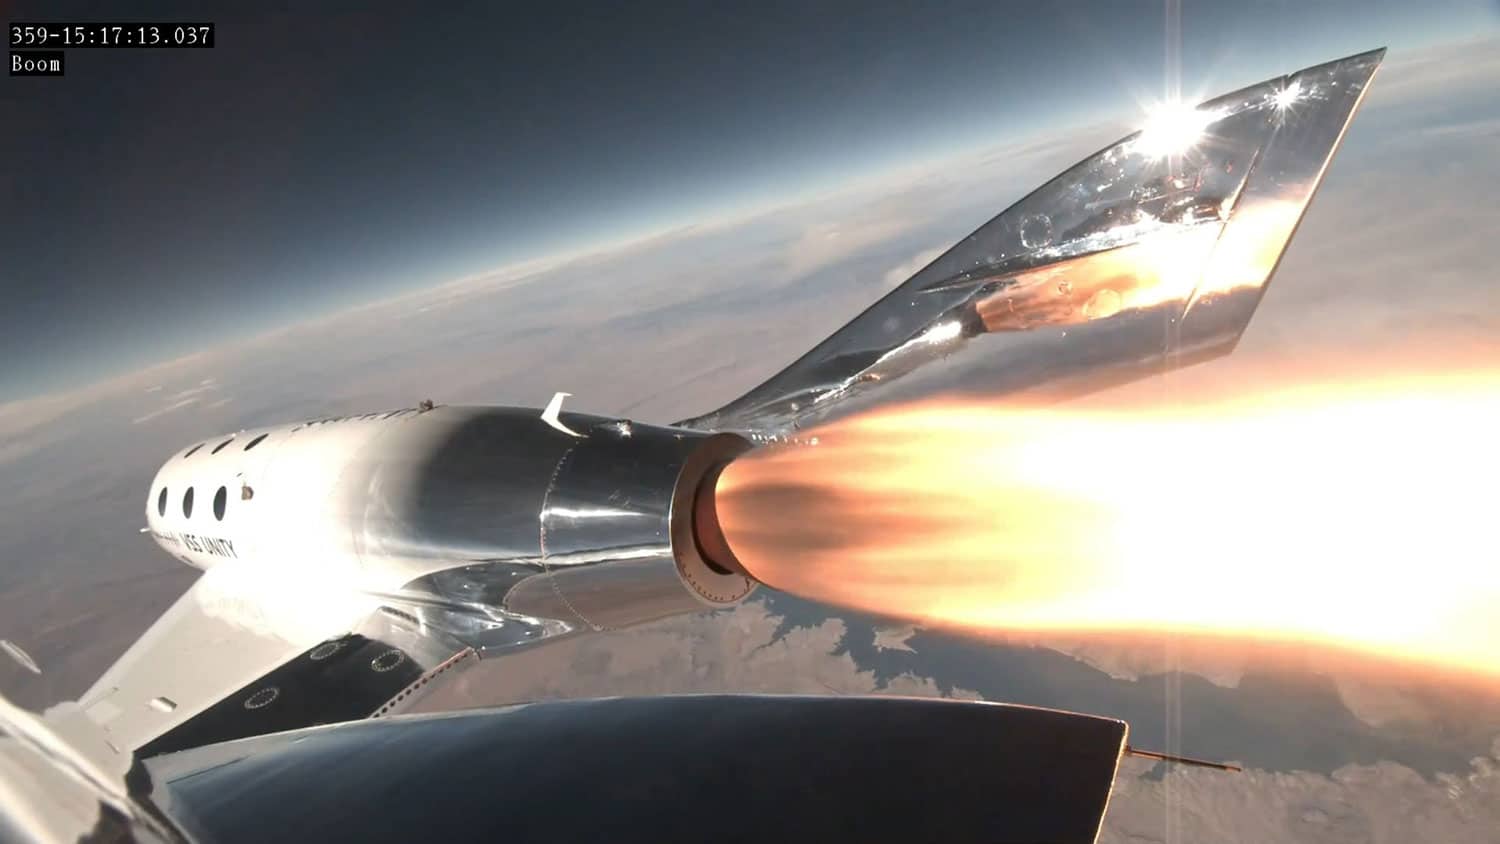 VSS Unity fired its hybrid rocket motor, propelling it to a speed of Mach 3.